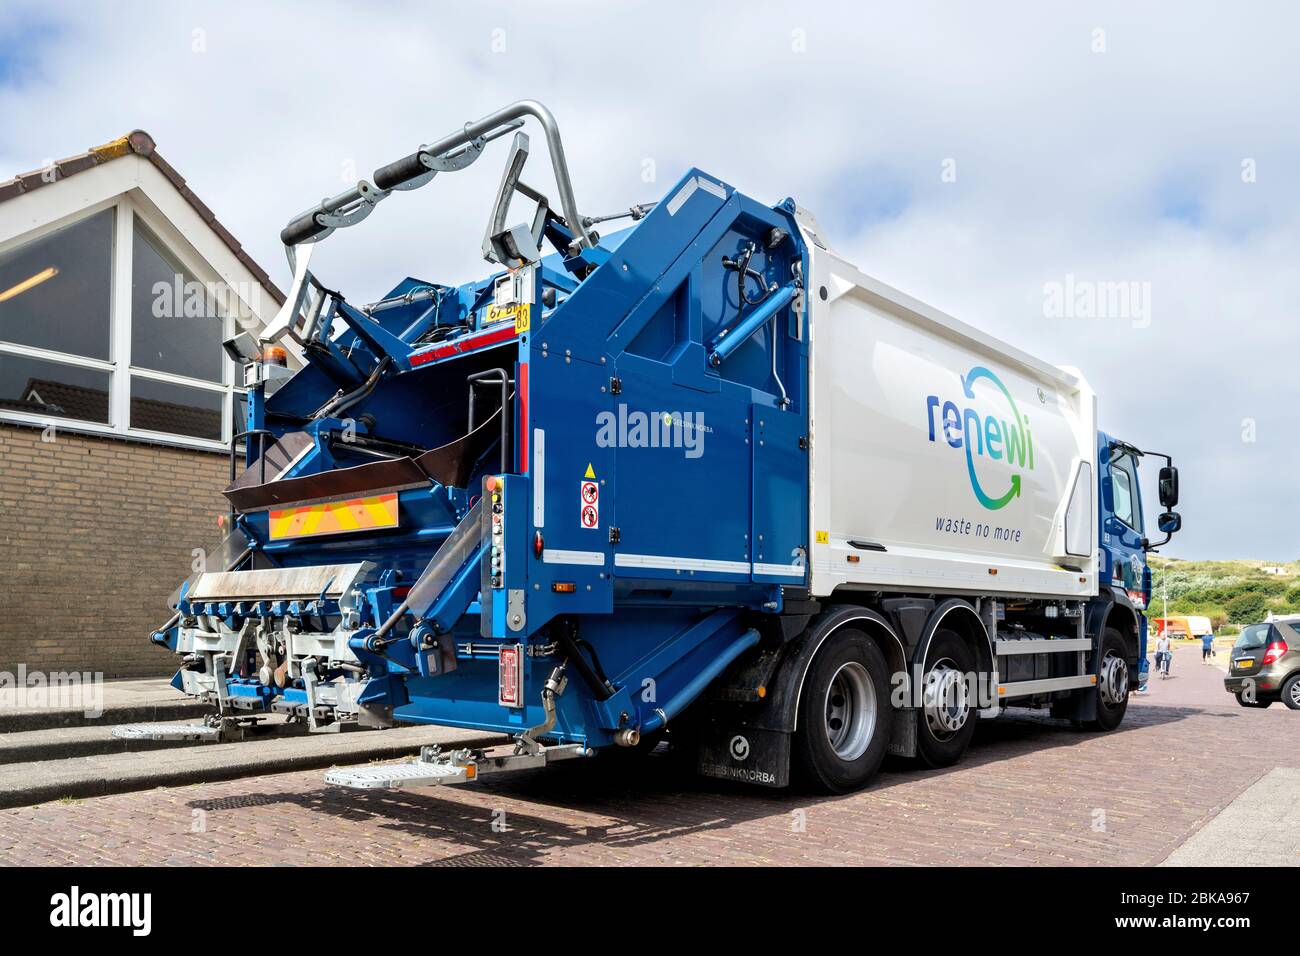 Renewi dustcart. Renewi plc is a leading European waste management company operating in Europe and North America. Stock Photo